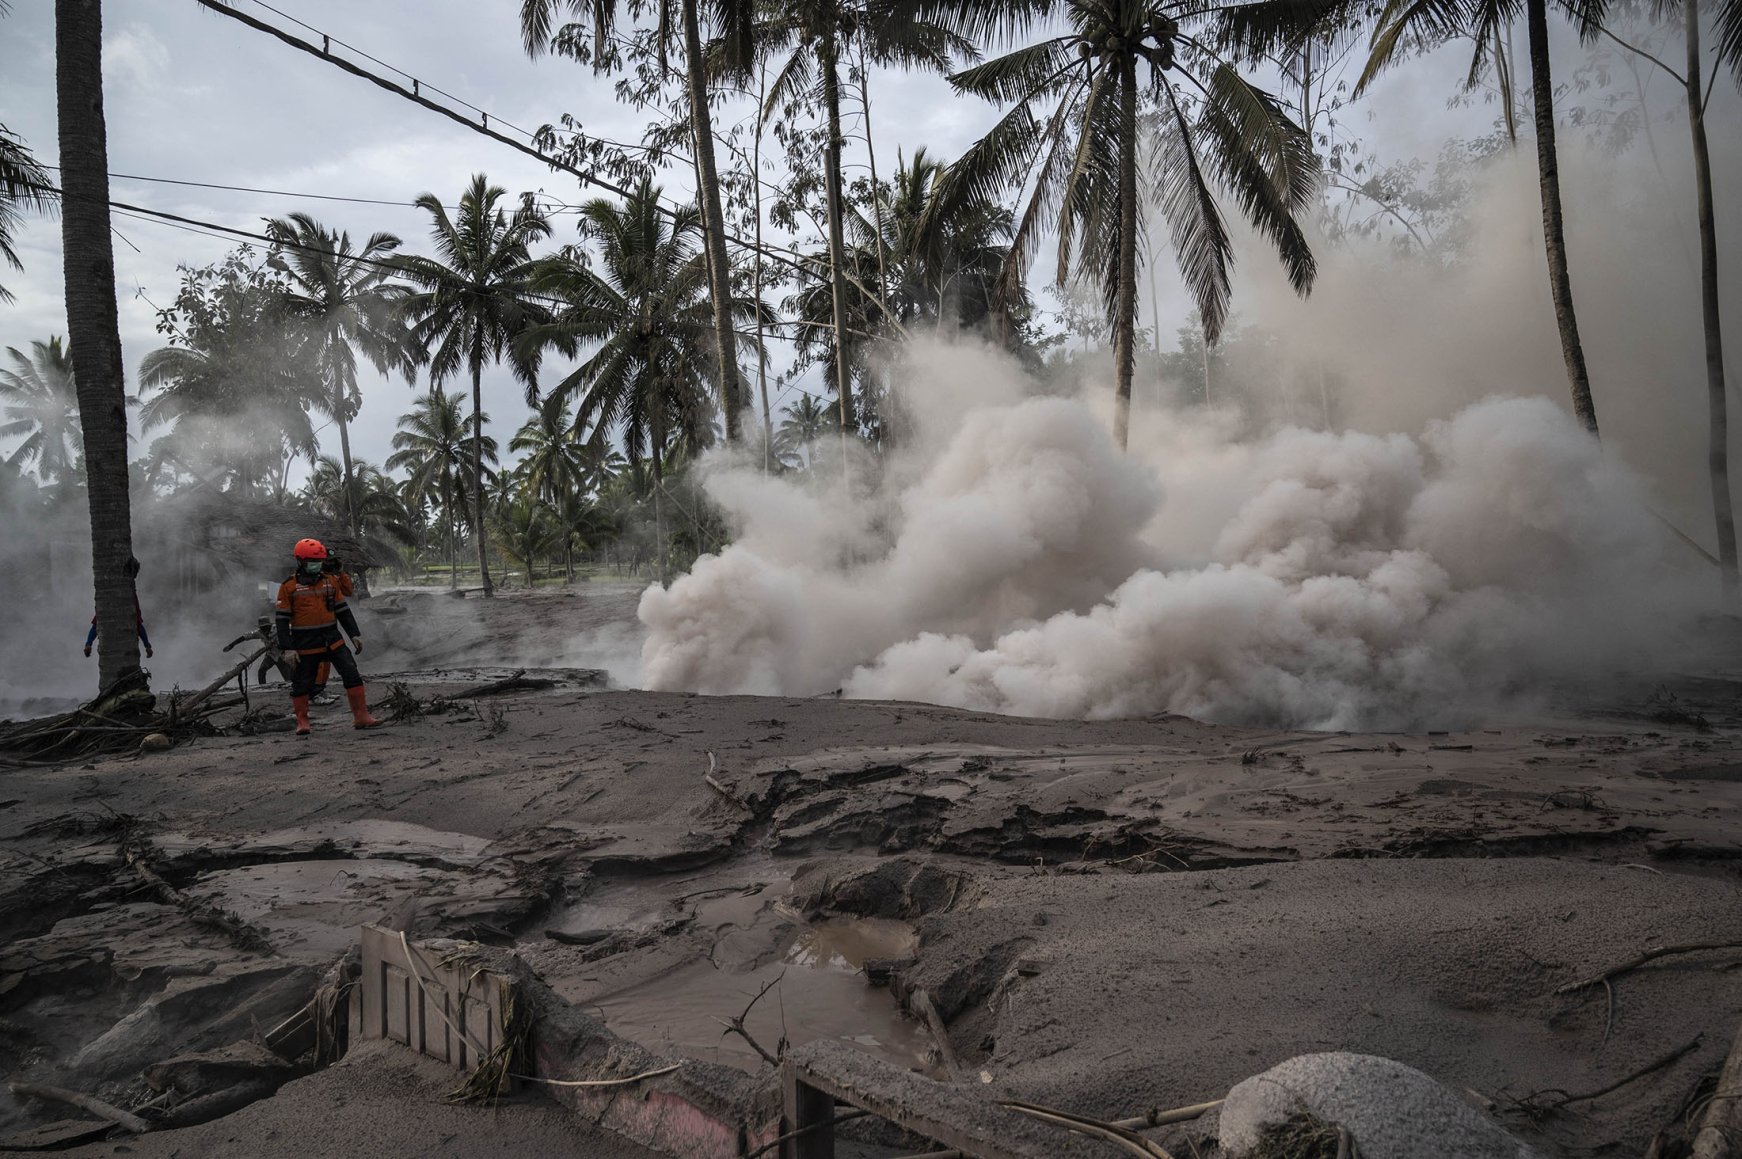 In Photos: Severe and deadly eruption of Semeru volcano in Indonesia